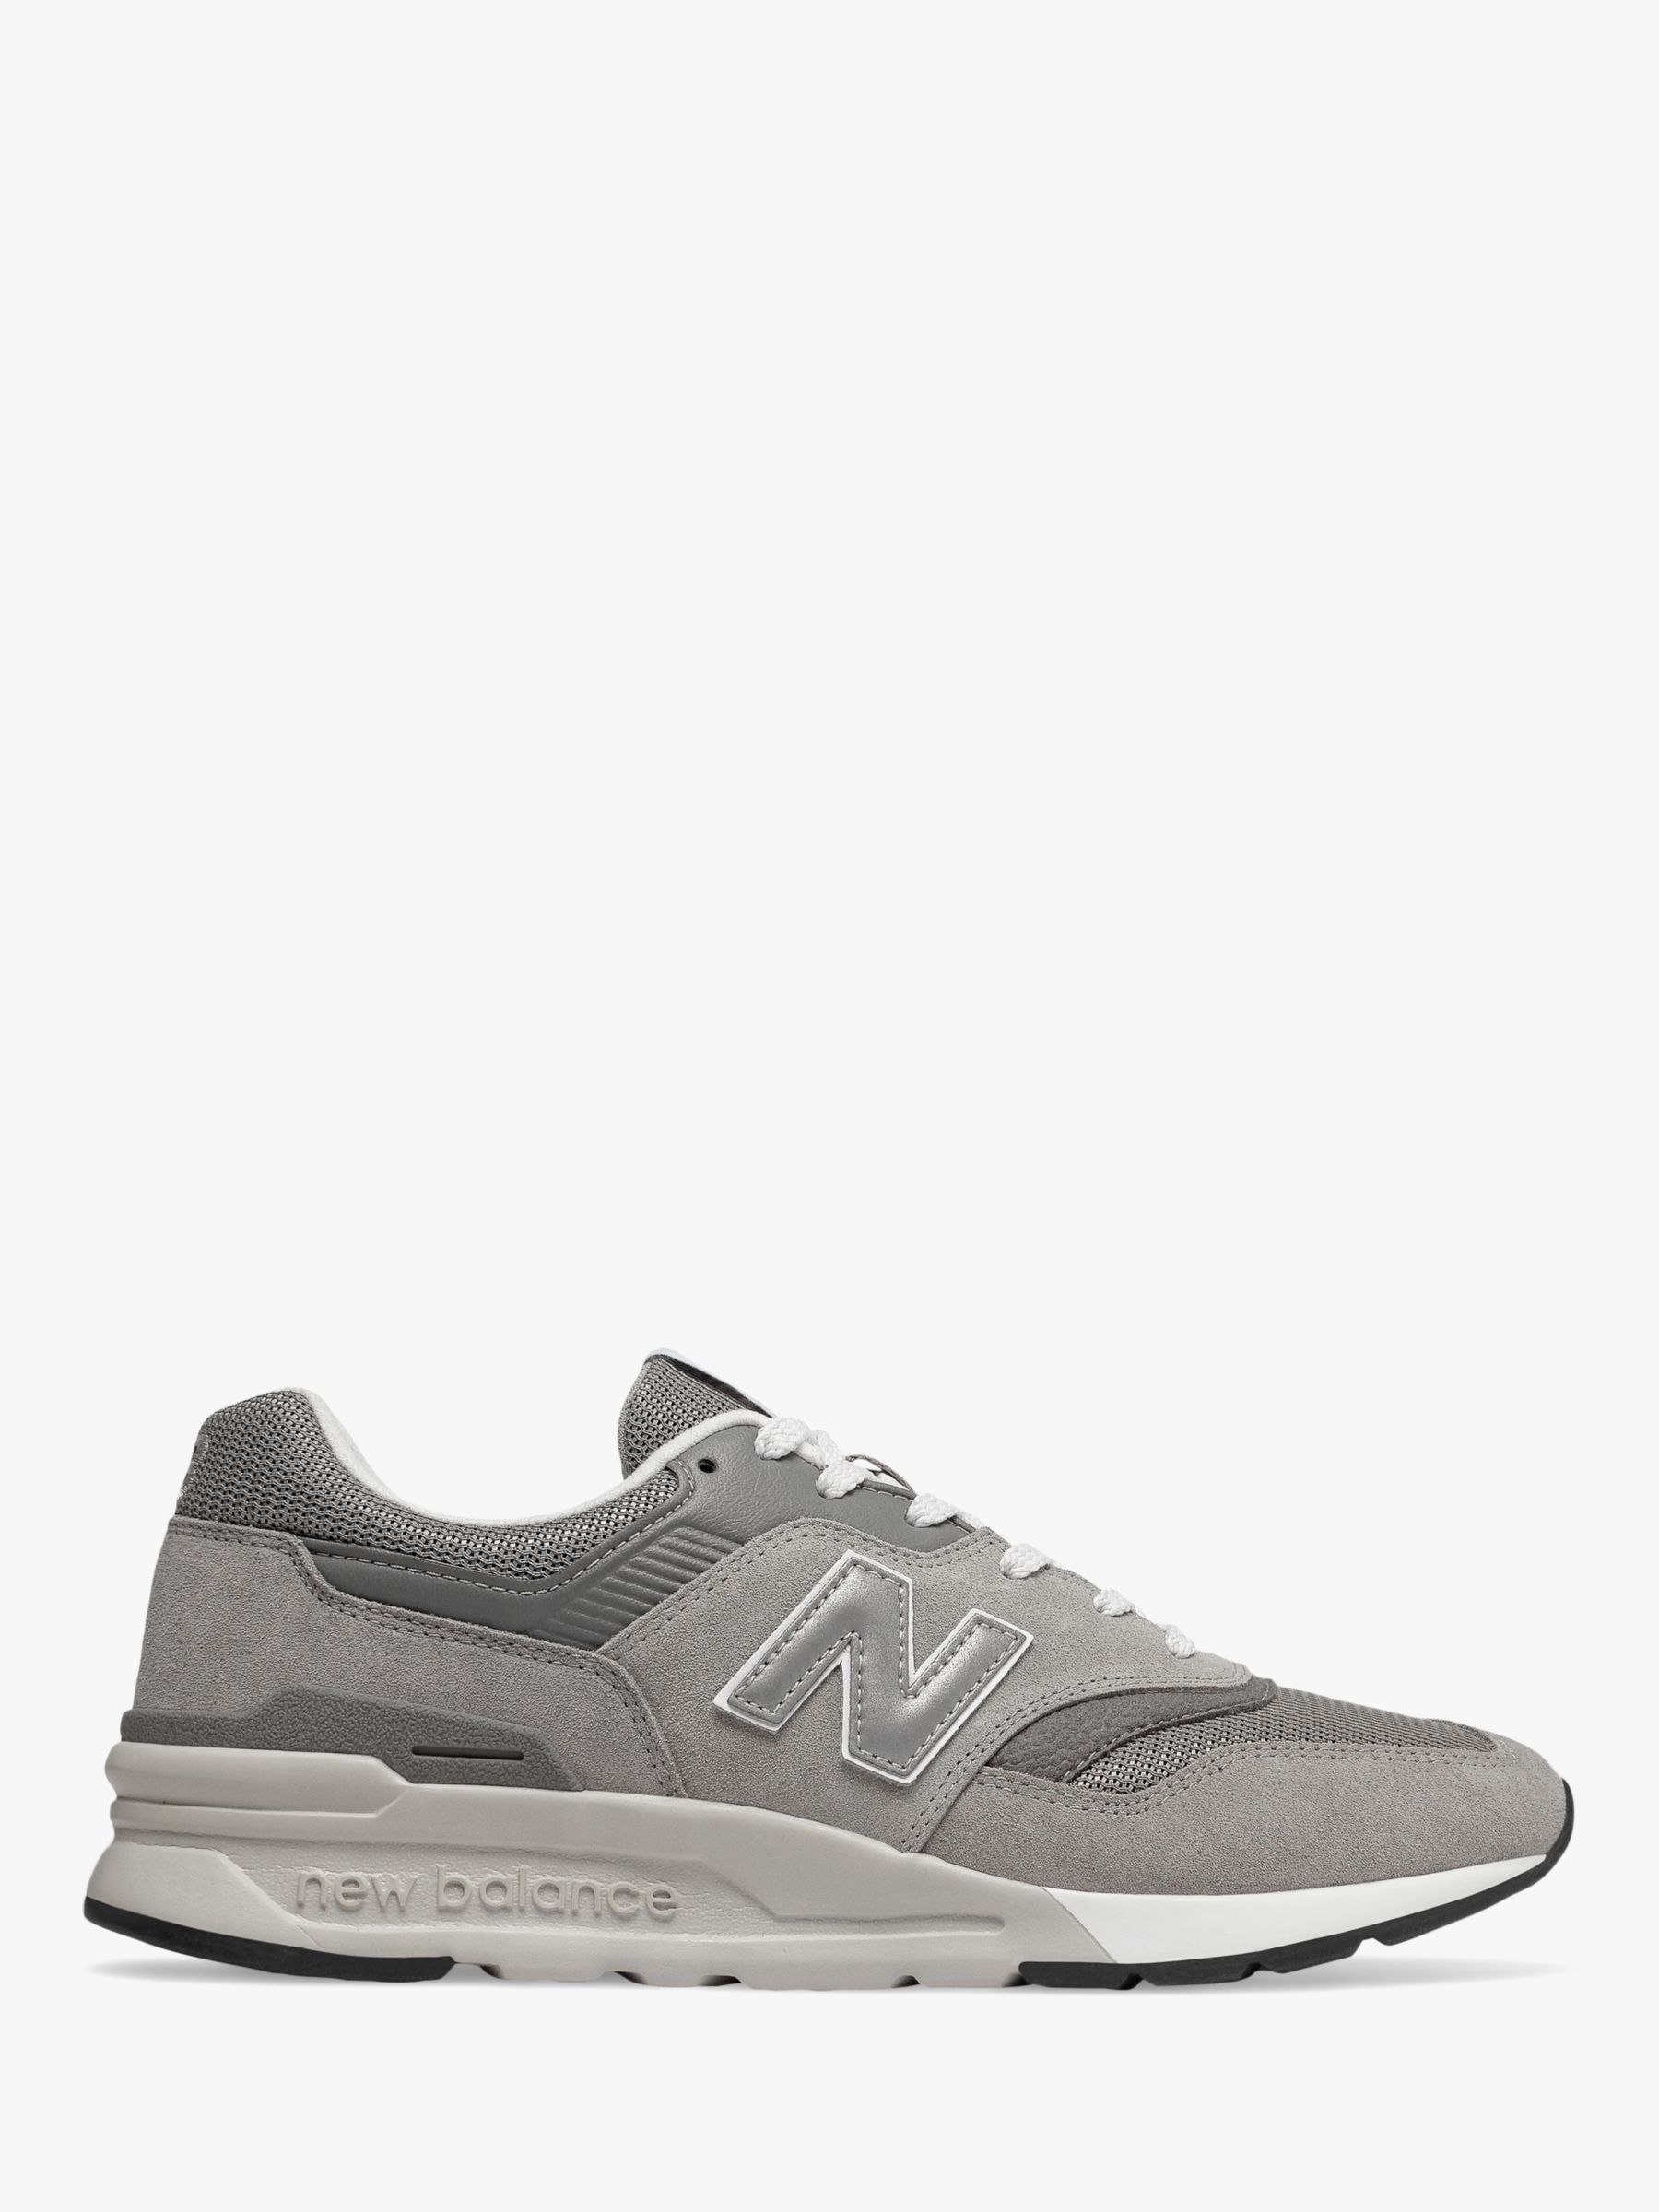 New Balance 997H Men's Suede Trainers, Grey at John Lewis u0026 Partners